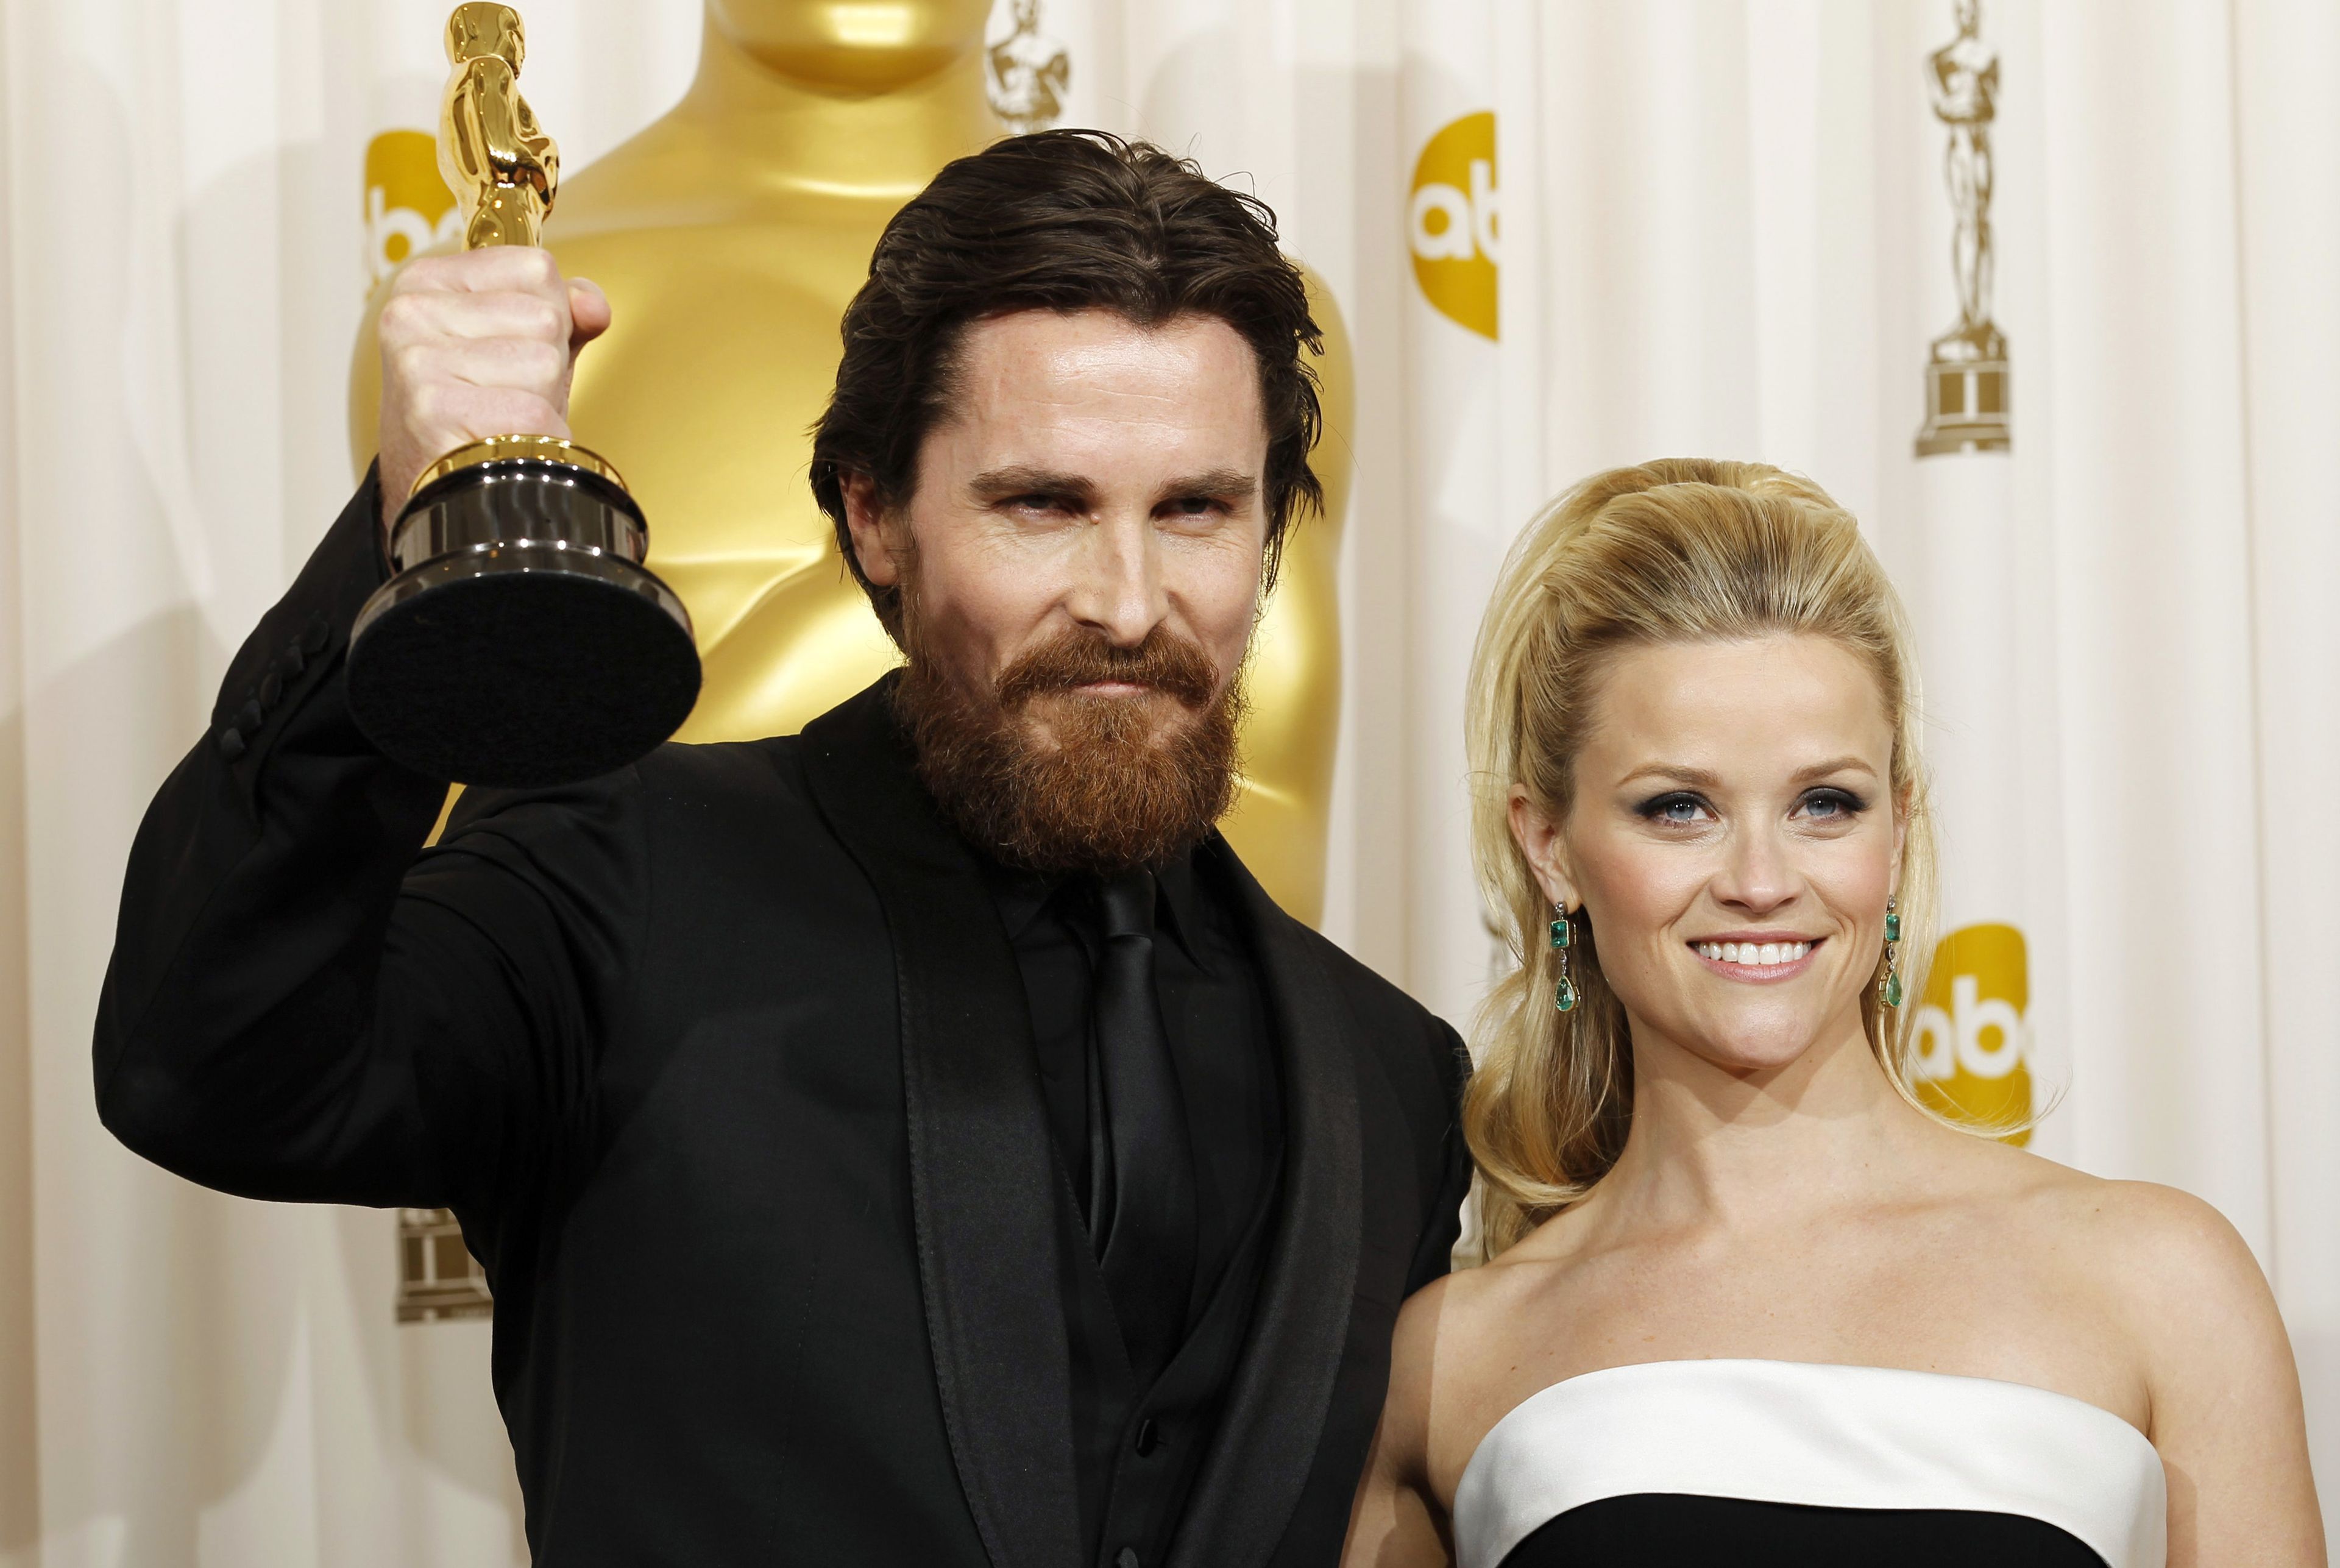 Christian Bale y Witherspoon.